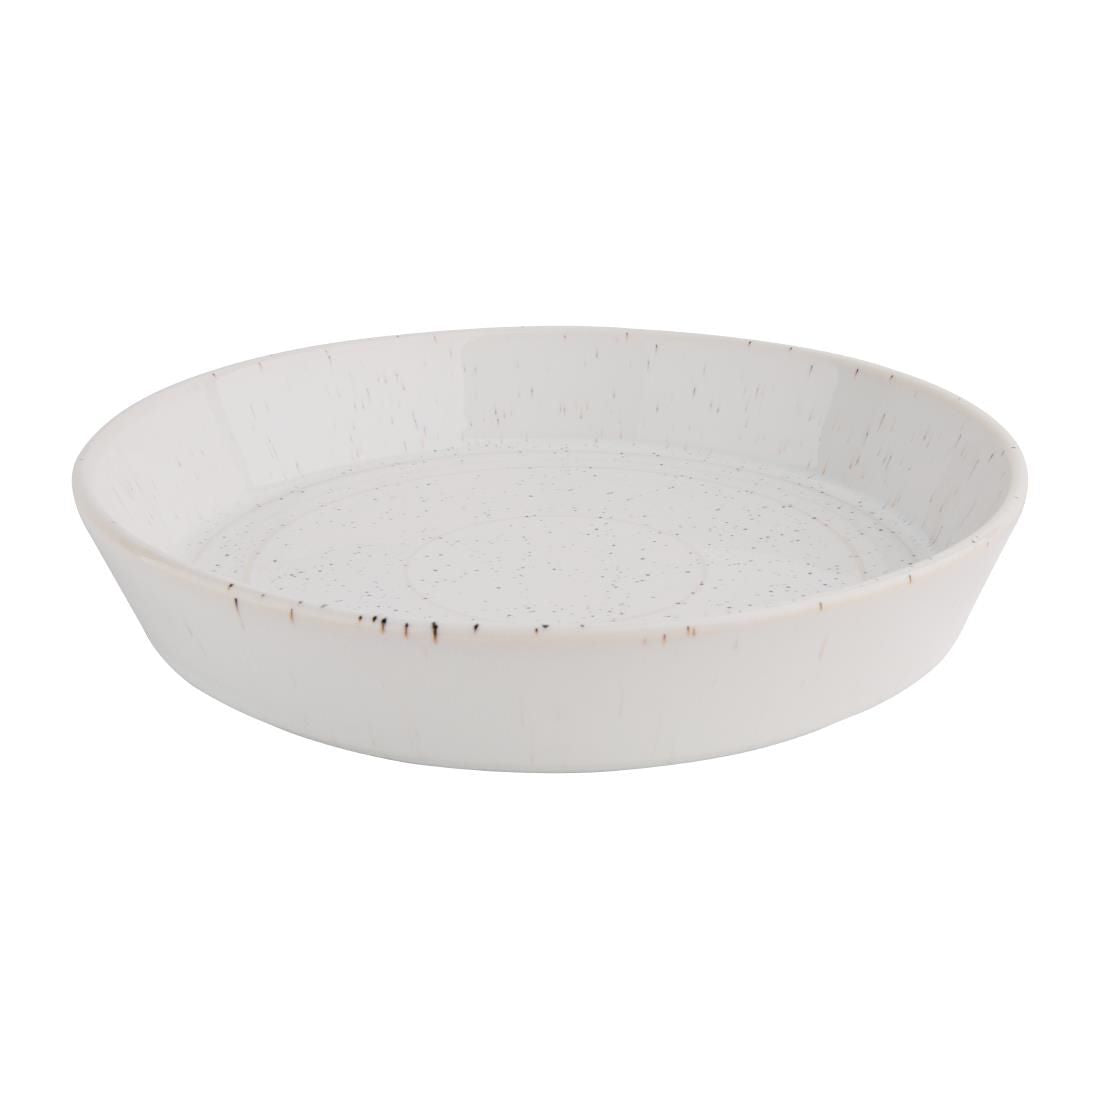 FD901 Olympia Cavolo Flat Round Bowls White Speckle 220mm (Pack of 4) JD Catering Equipment Solutions Ltd